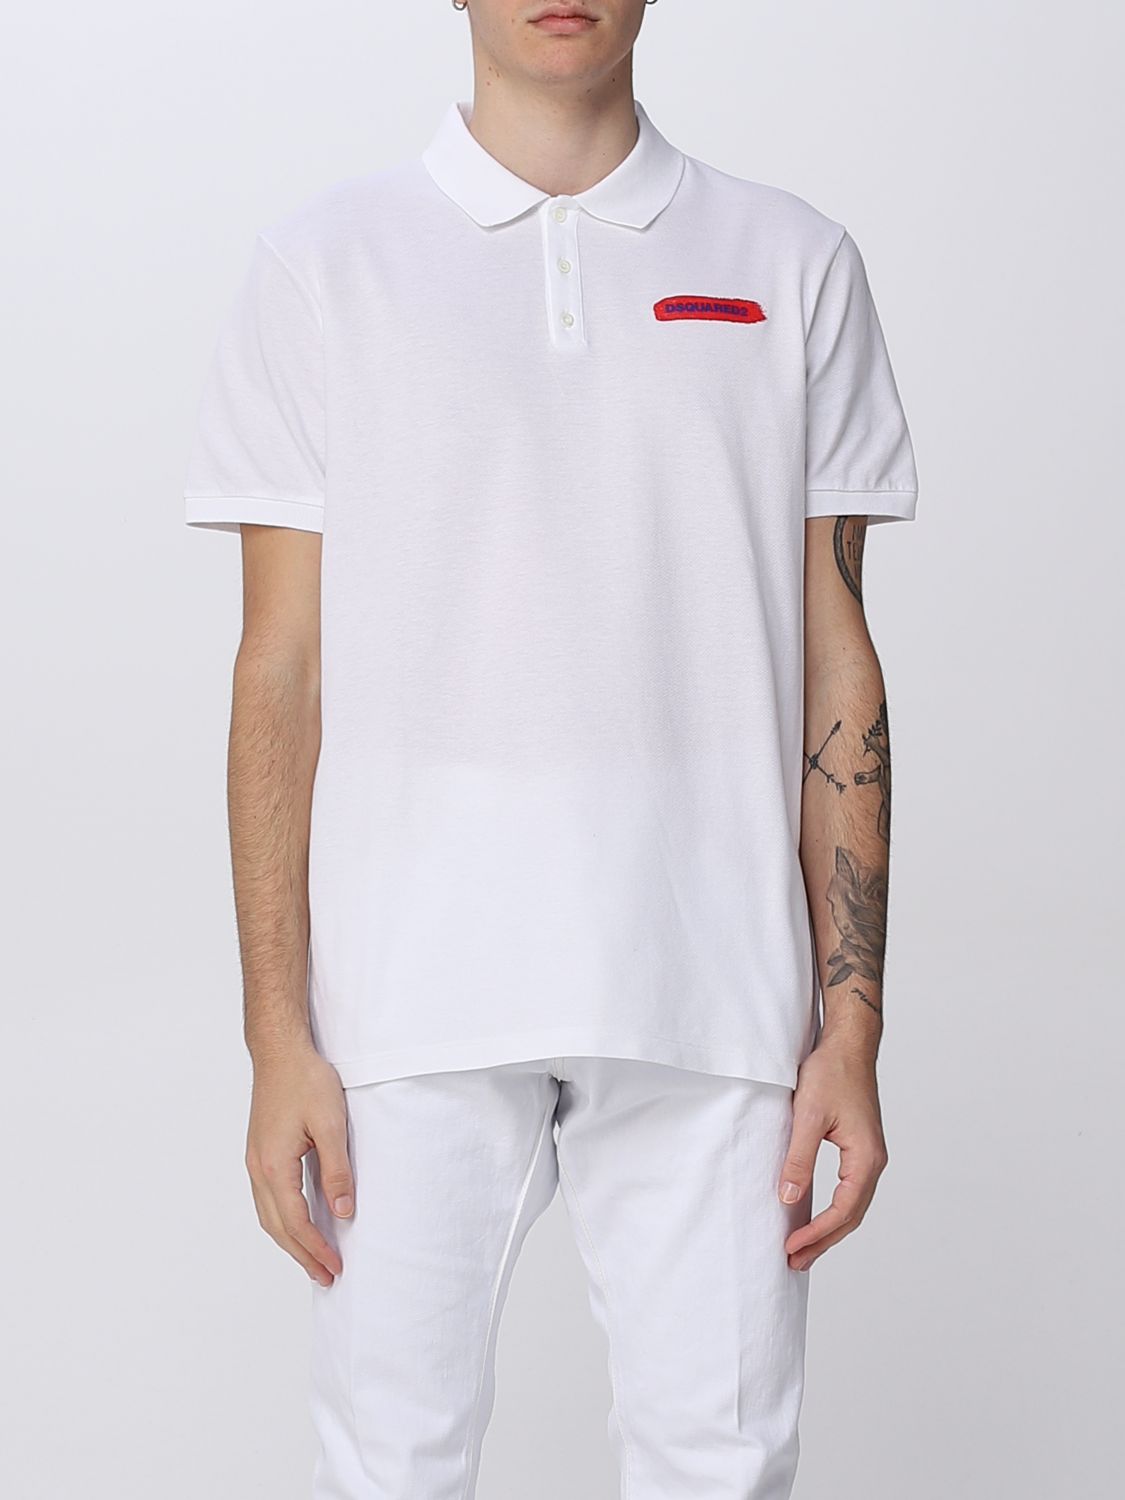 DSQUARED2 POLO SHIRT IN COTTON,D92386001